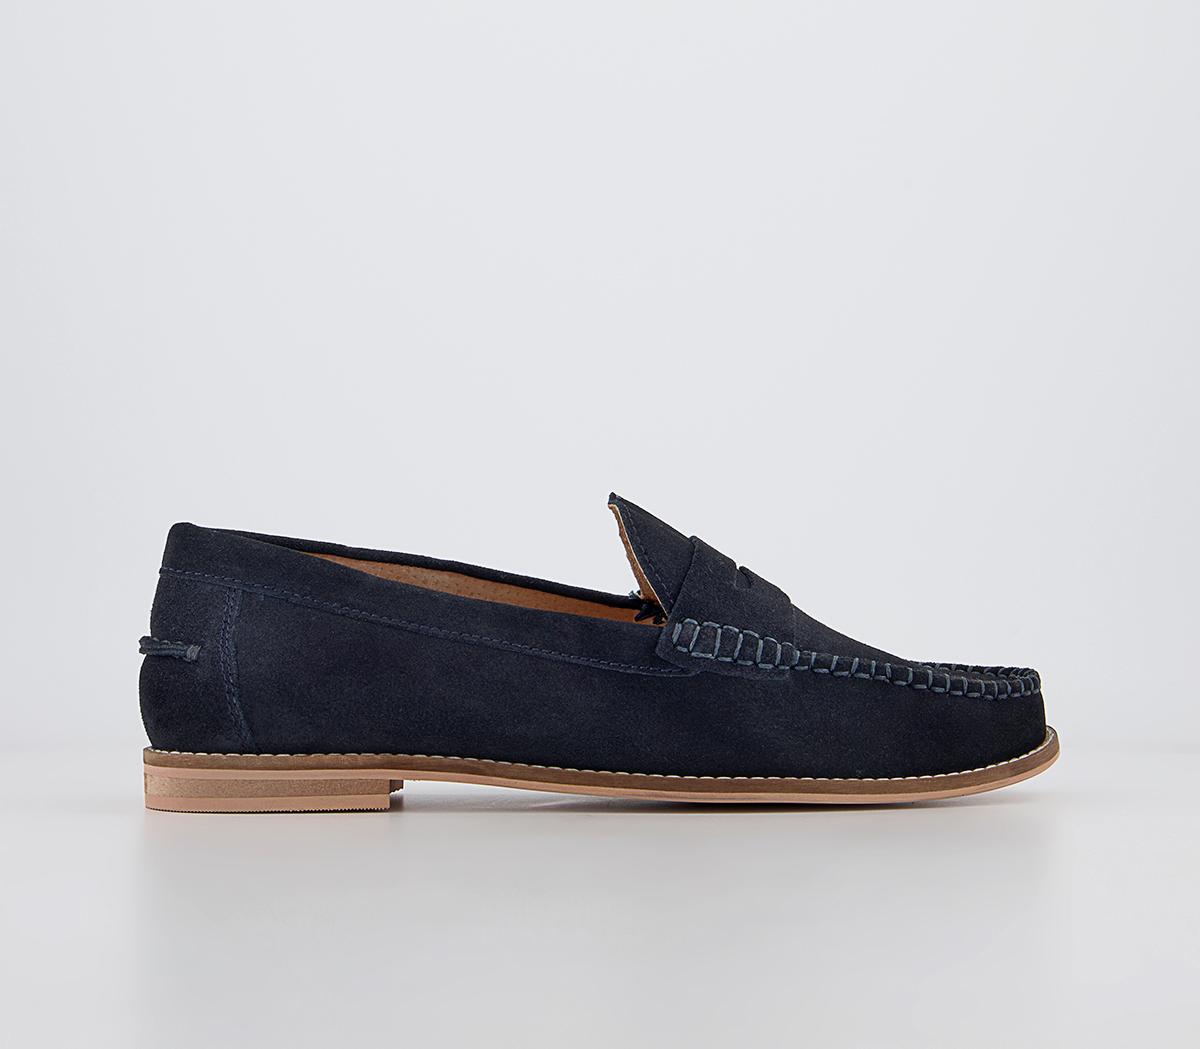 OFFICEMelvin Saddle LoafersNavy Suede